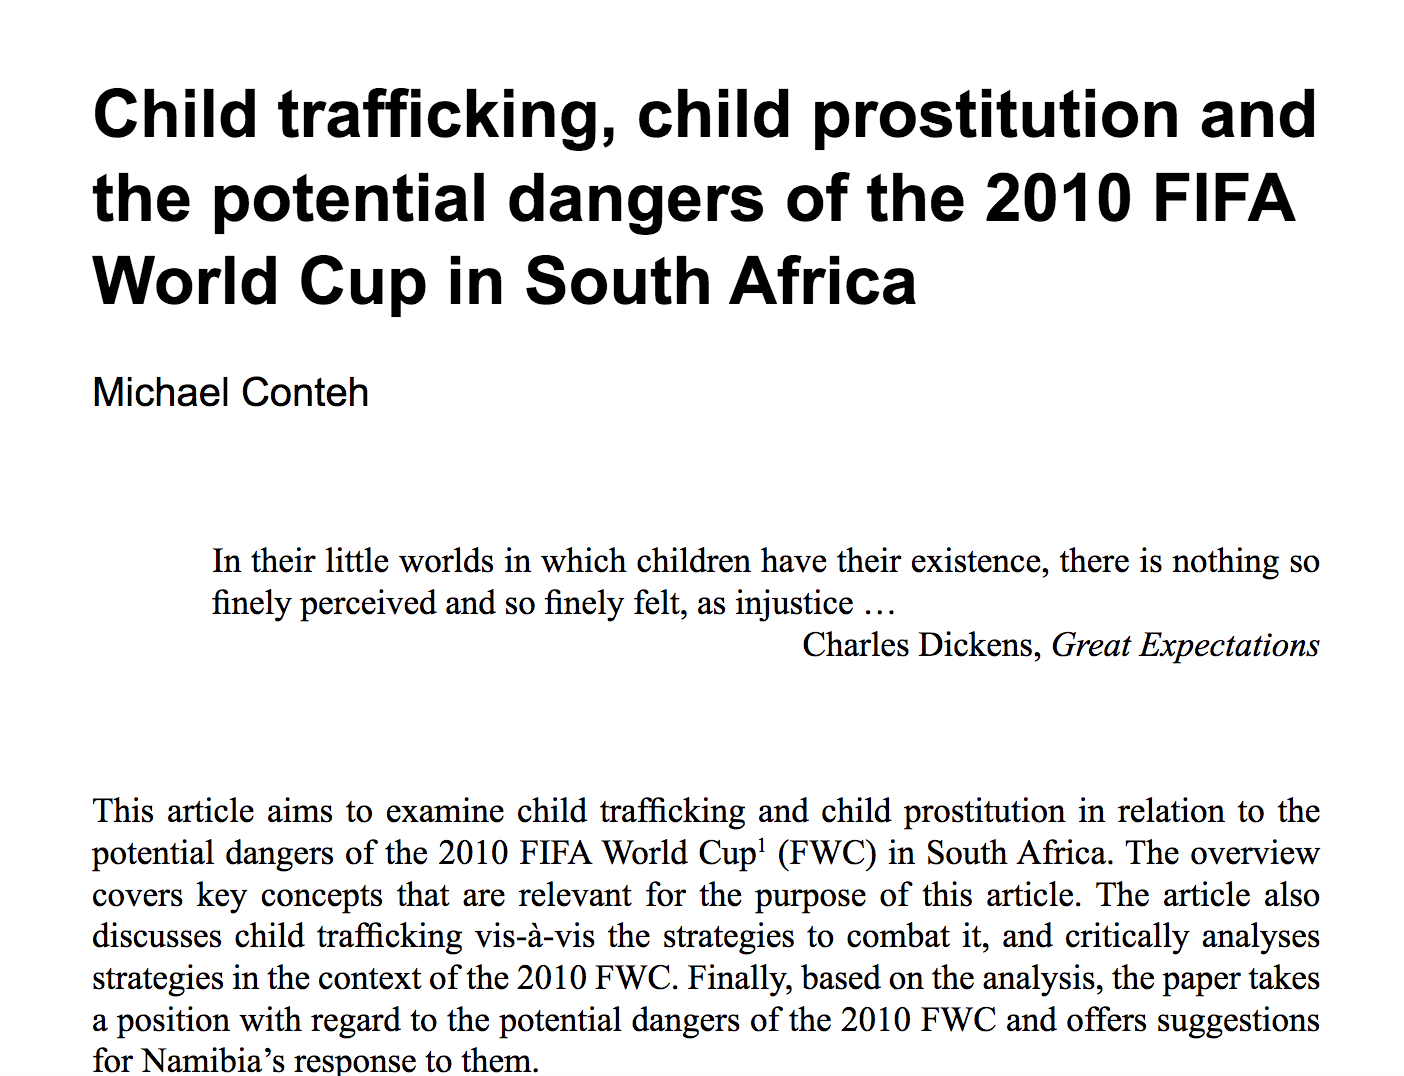 Child trafficking, child prostitution and the potential dangers of the 2010 FIFA World Cup in South Africa